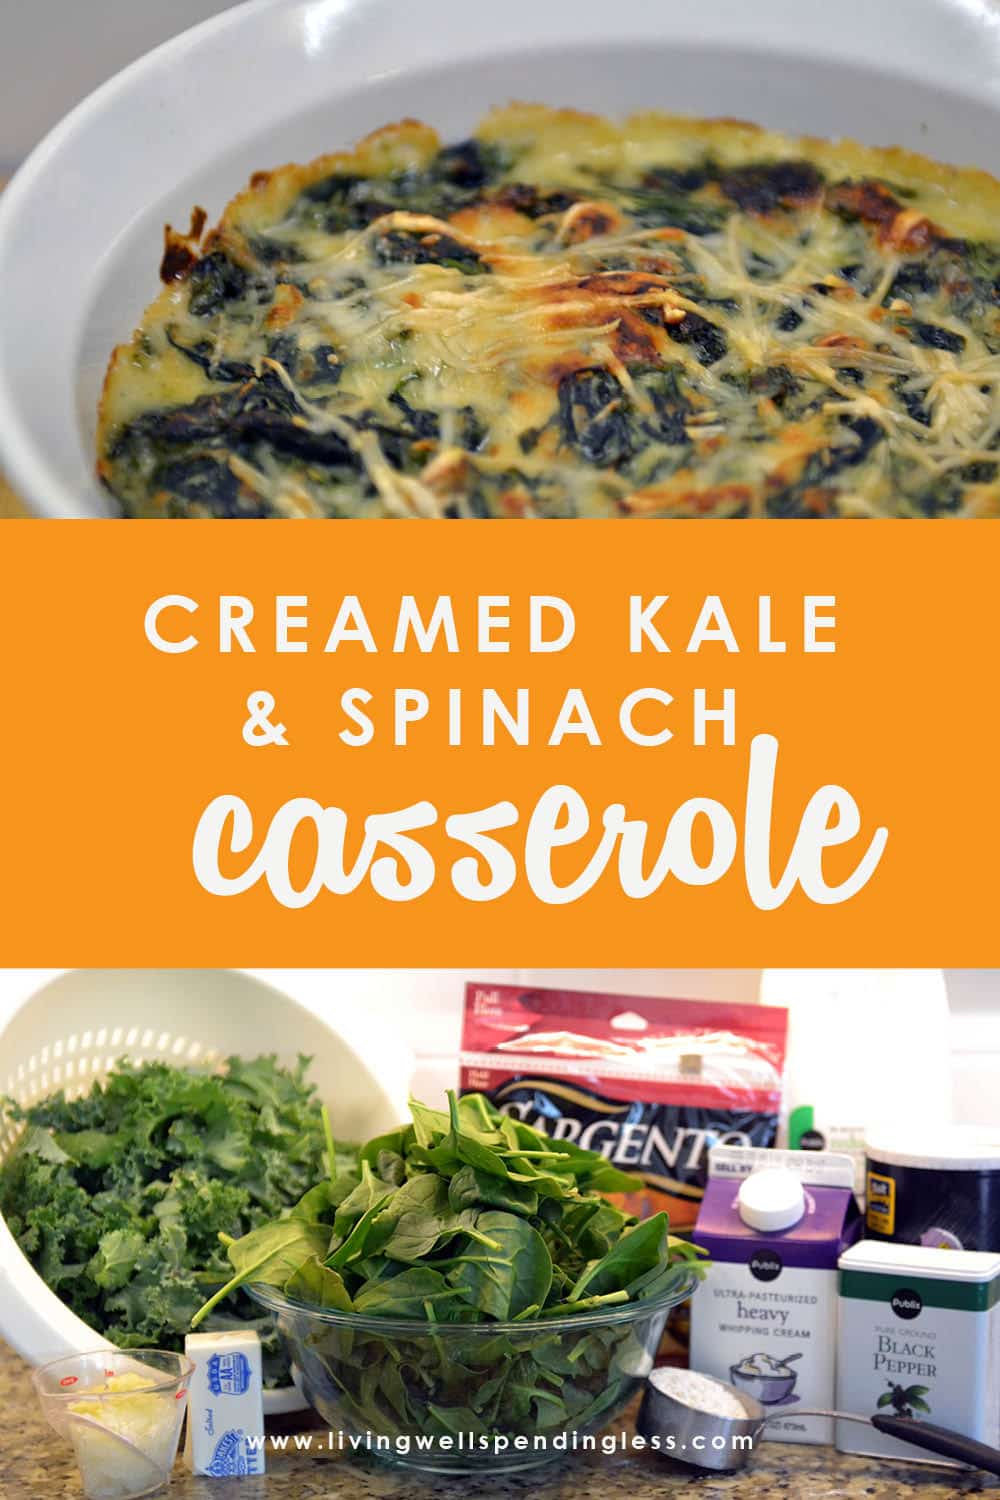 Need more veggies? This easy-to-make, amazingly delicious creamed kale and spinach casserole combines two leafy greens into one decadent dish.